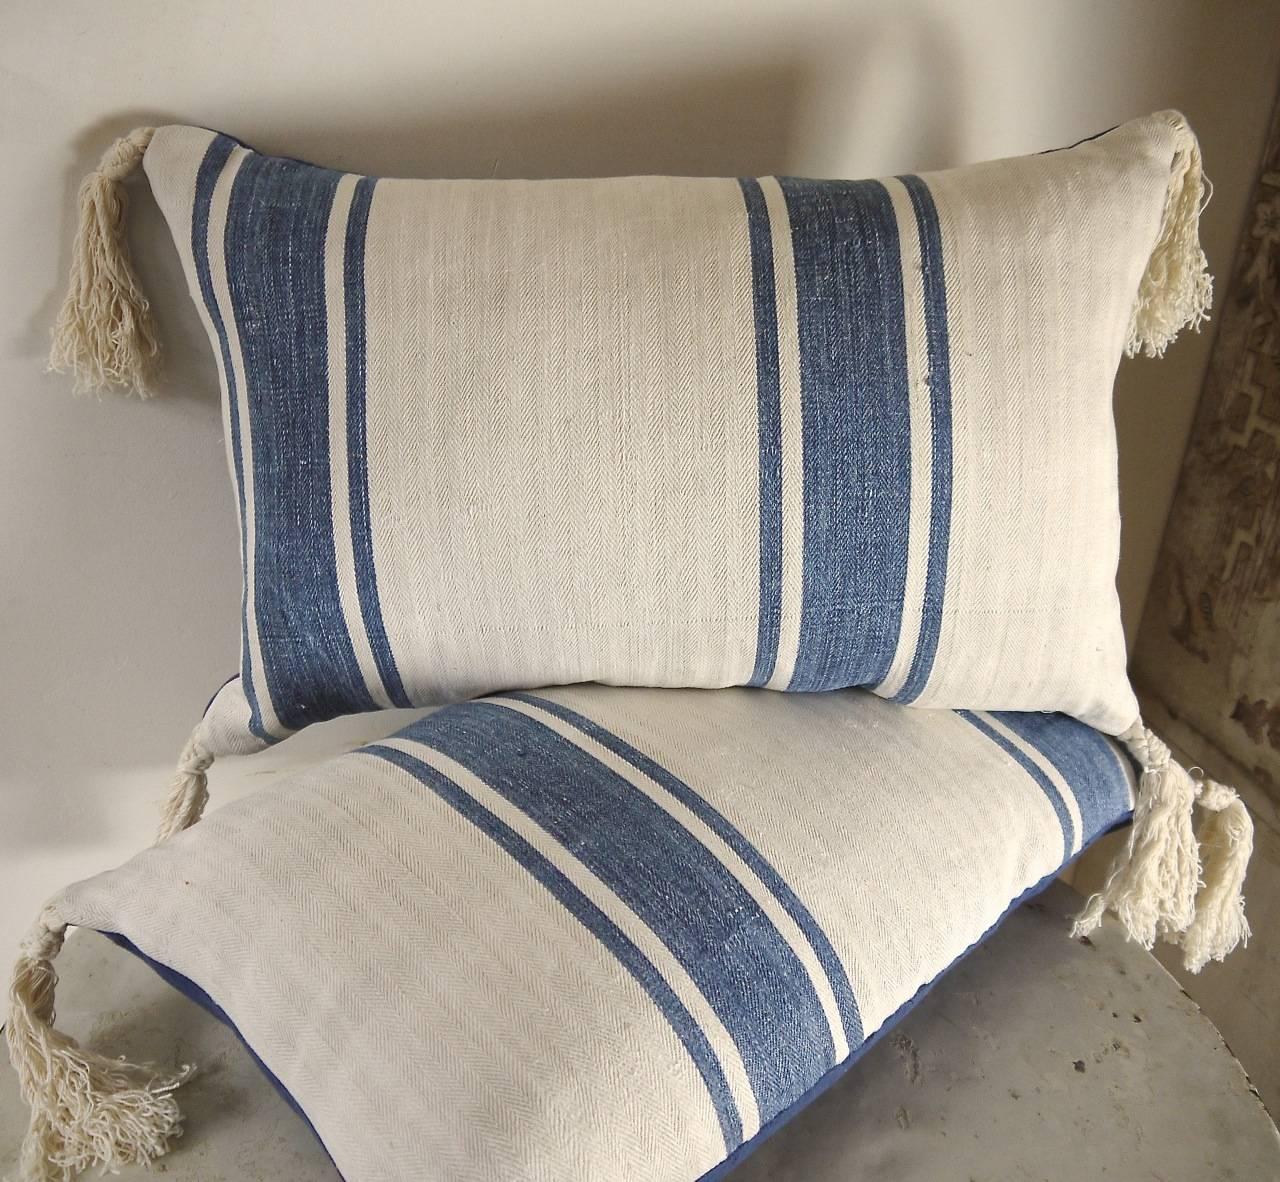 Pair of late 19th century French linen herringbone cushions with indigo stripes. The linen is softly worn and washed with age with a faded indigo stripe and a charming patch. Has a great look and feel. Antique French cotton tassels on each corner.